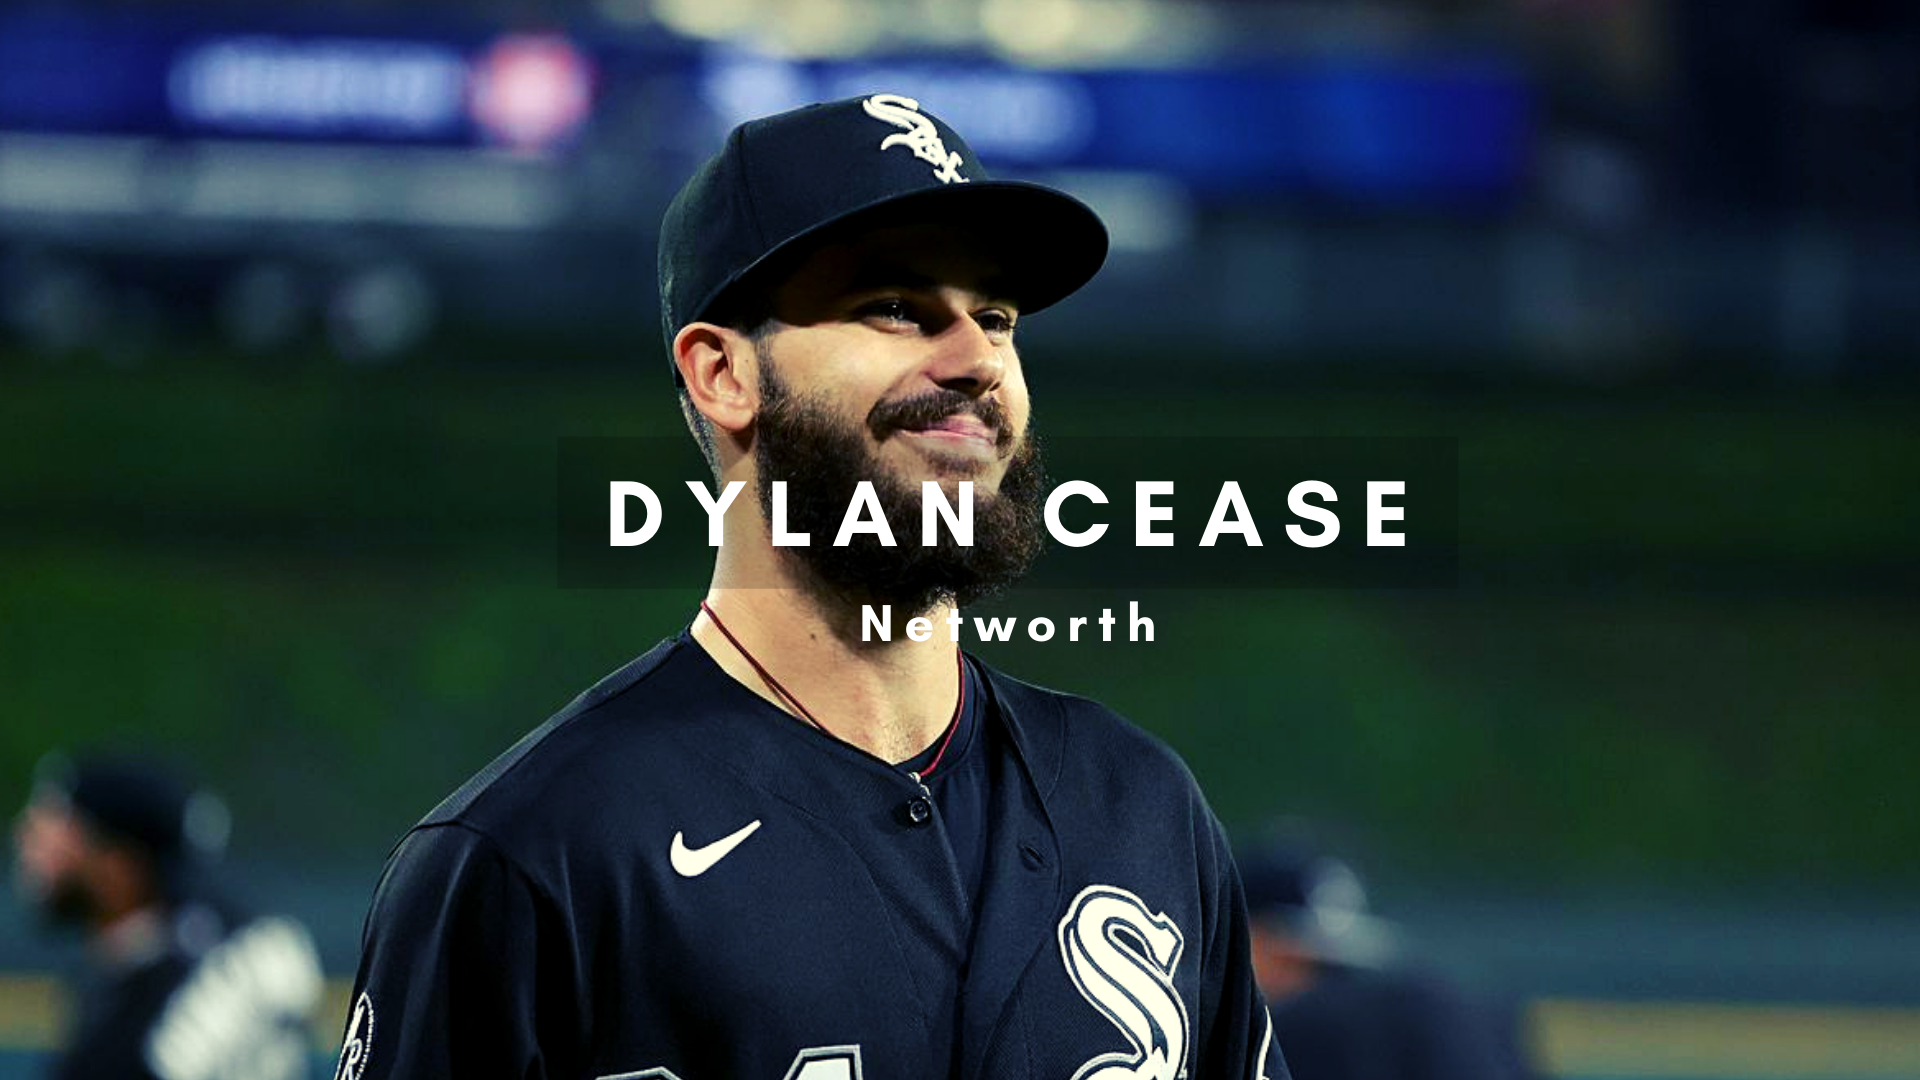 Dylan Cease 2023 – Net Worth, Contract Details, Salary and Bio